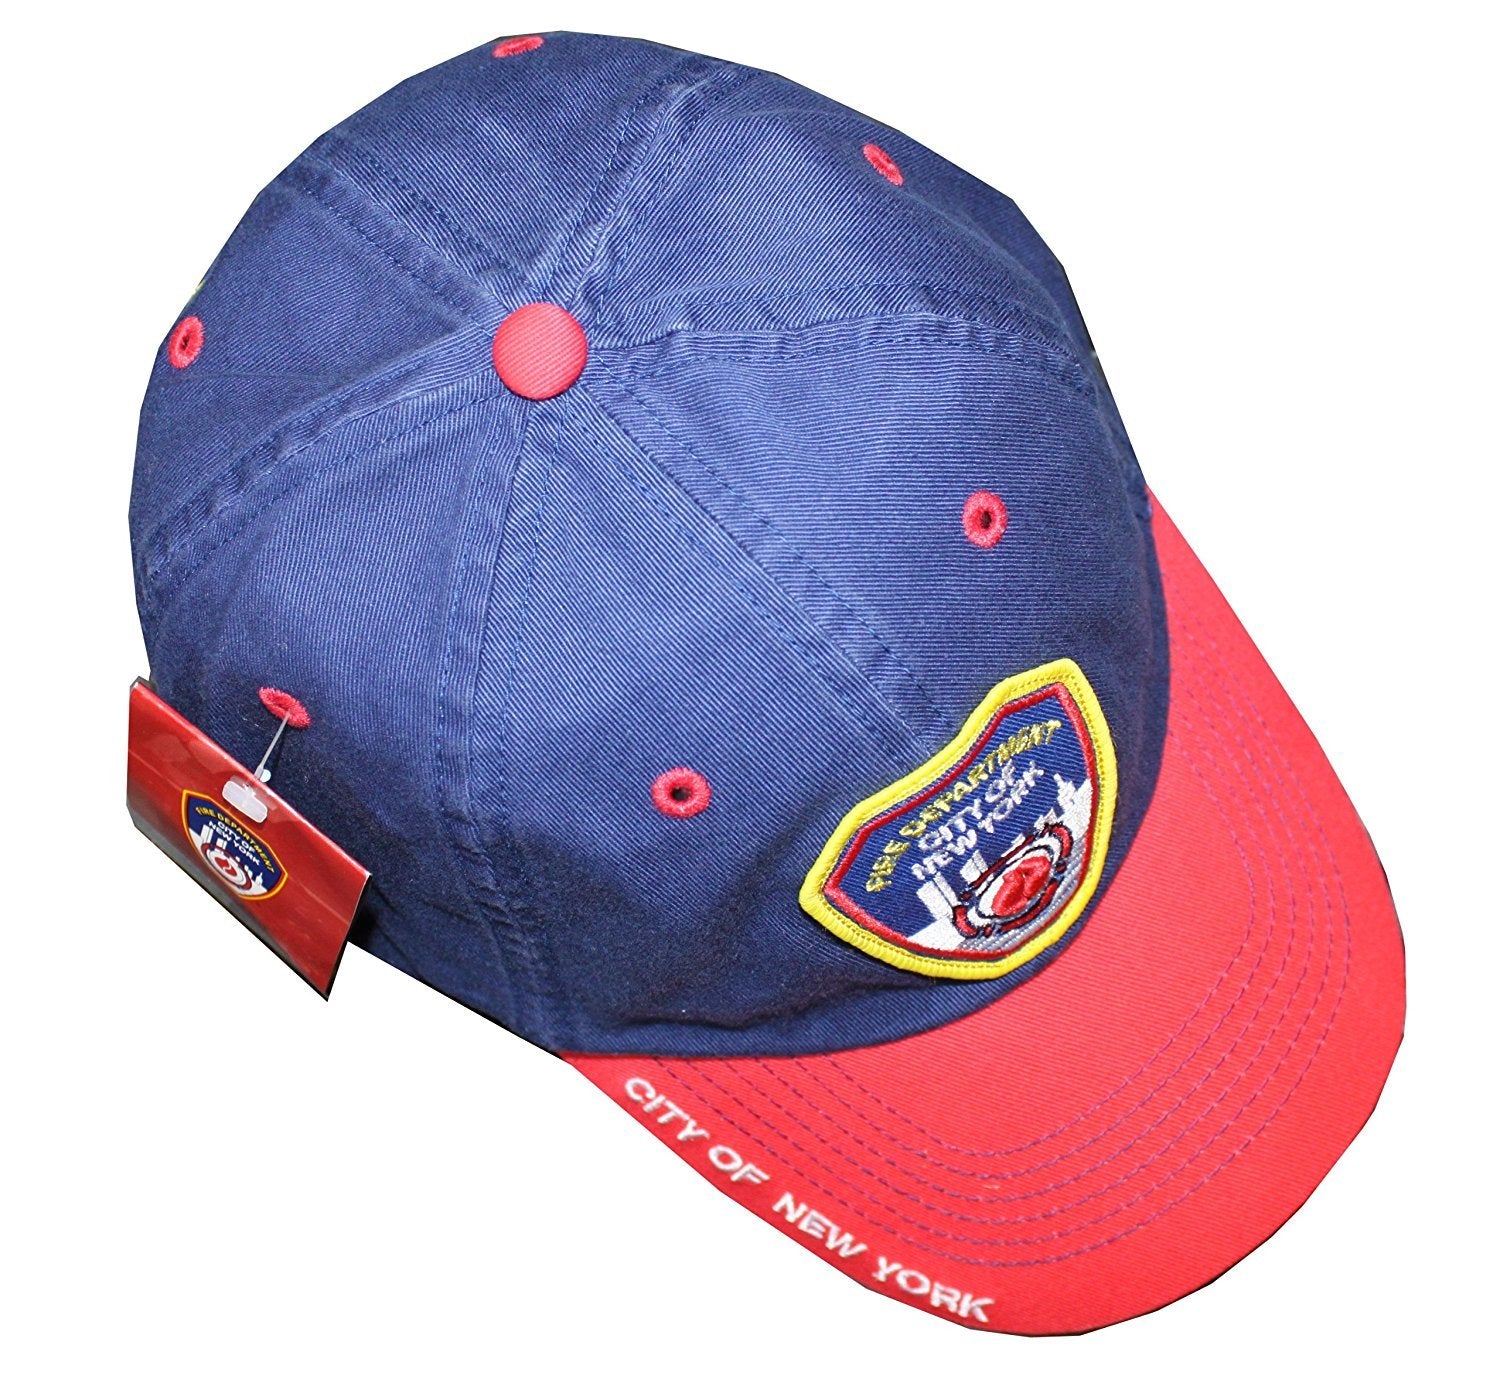 FDNY Baseball Hat Fire Department Of New York City Navy & Red One Size